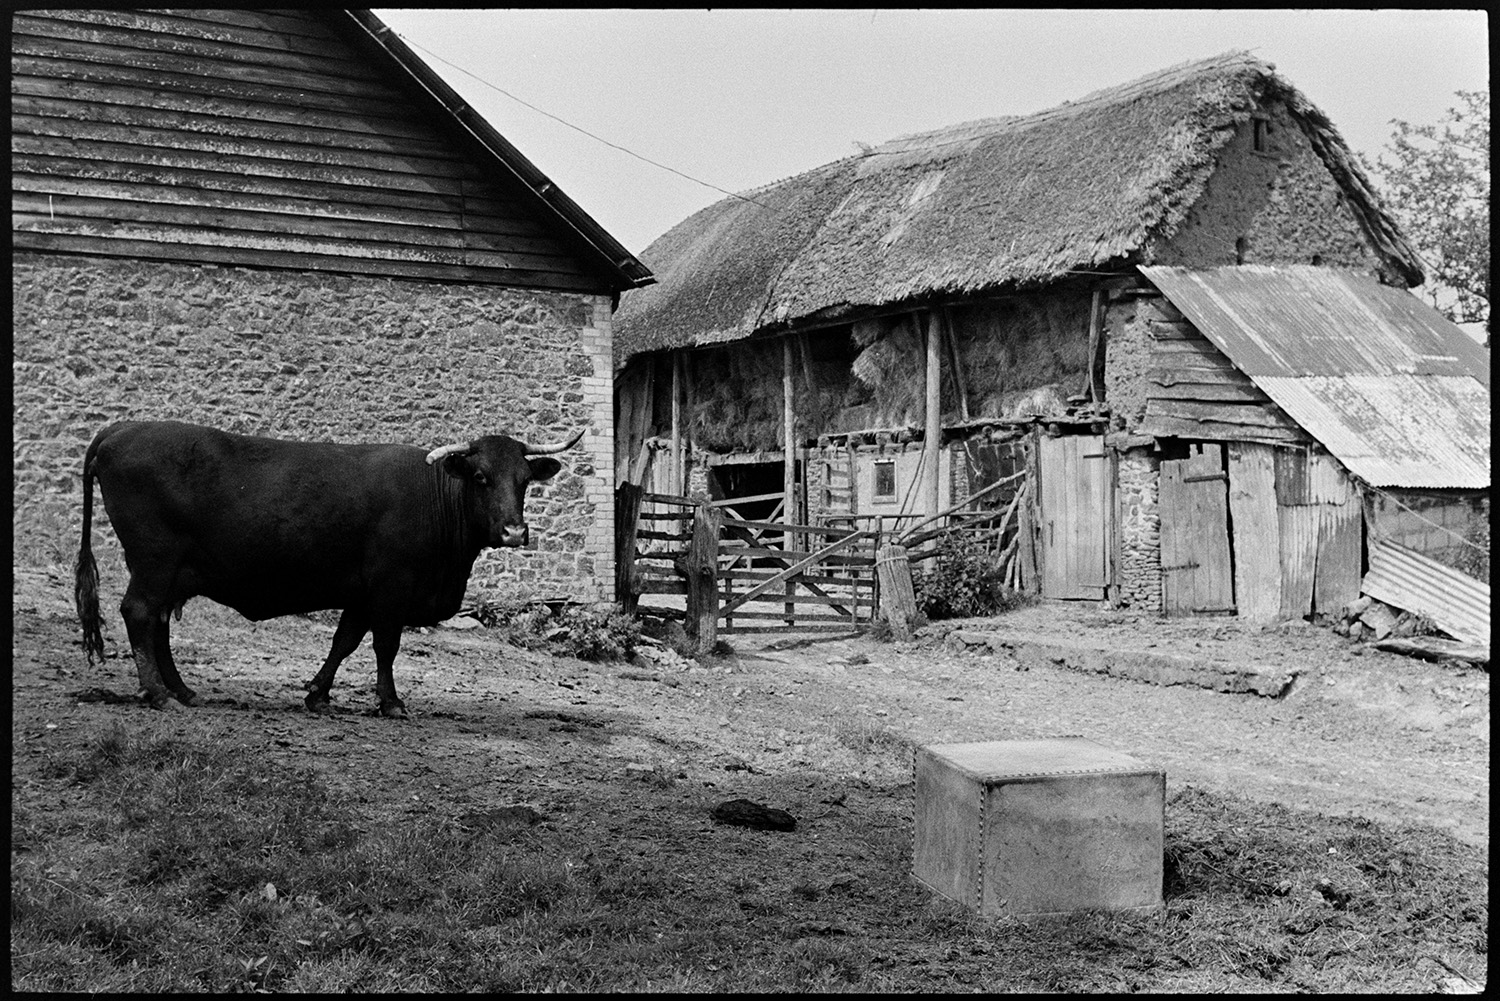 Devon Red cow walking past barns. 
[A horned Red Devon cow walking past two barns in the farmyard at Deckport, Hatherleigh. Hay bales are being stored in the tallet of the thatch and cob barn in the background.]